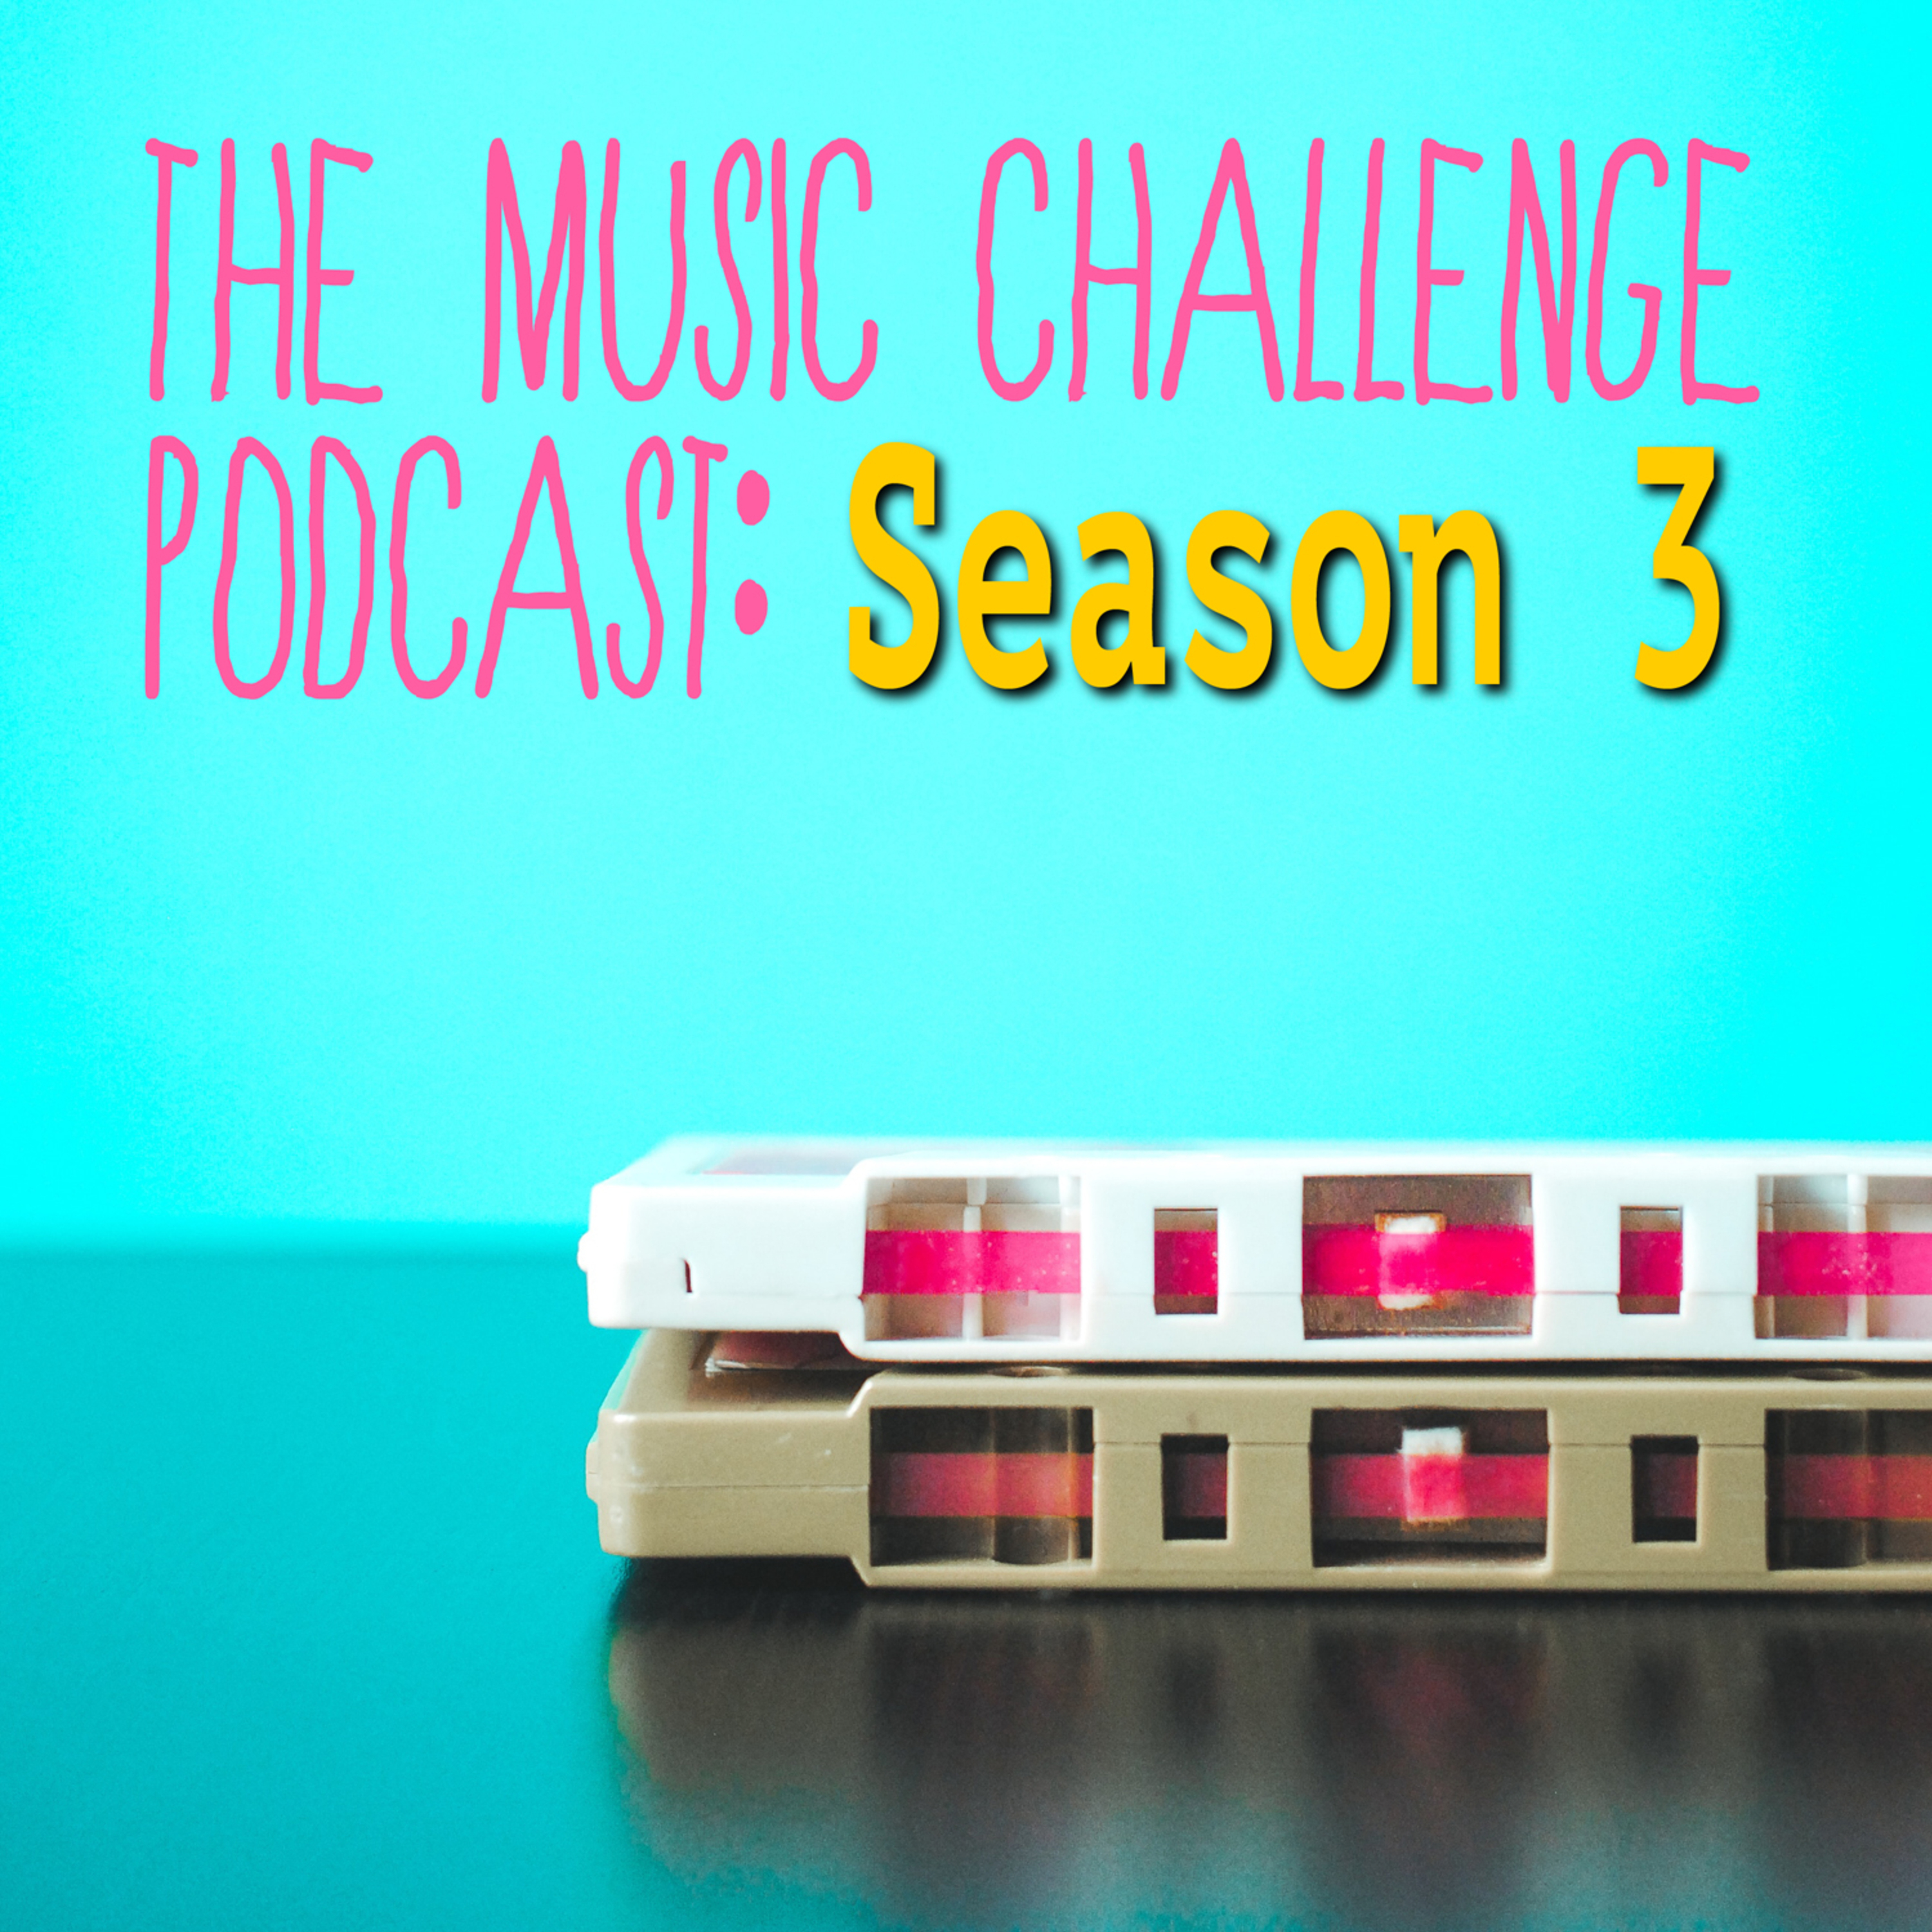 The Music Challenge Podcast